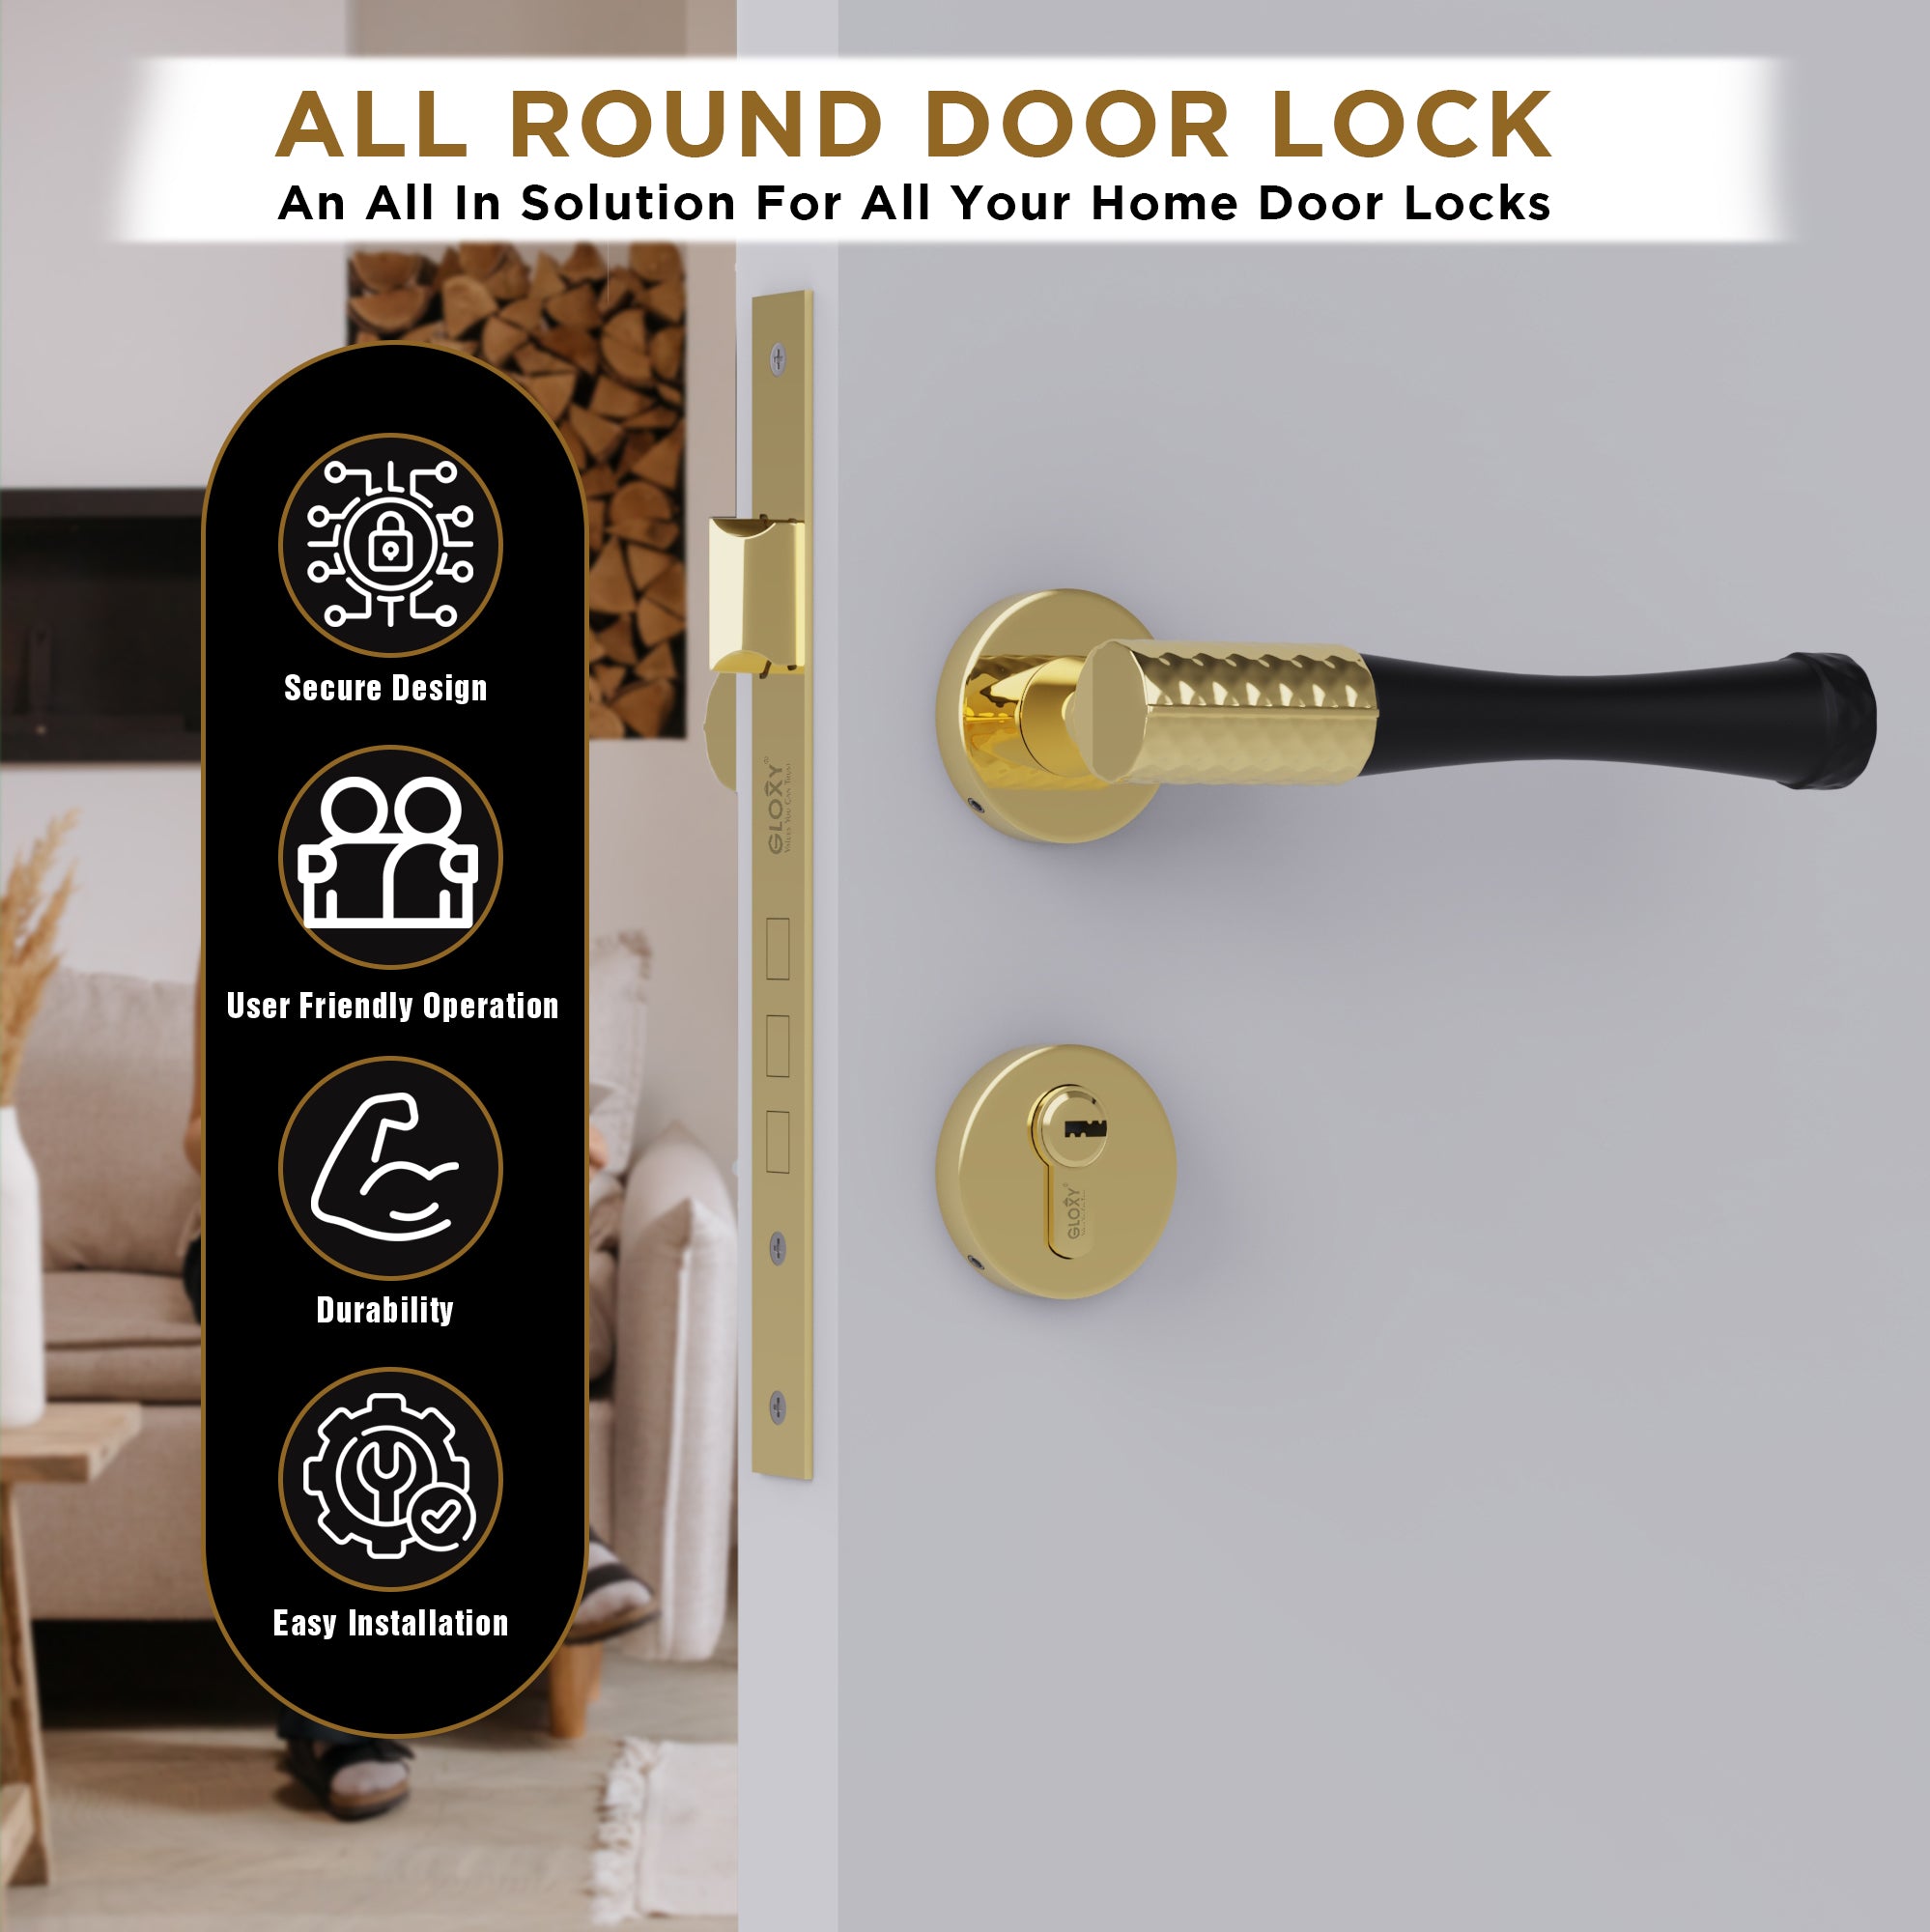 Mortise Door Handles Main Door Lock Handles Set with 3 Keys for Safety of Home | Bedroom, Office, Hotel, Home-by GLOXY®